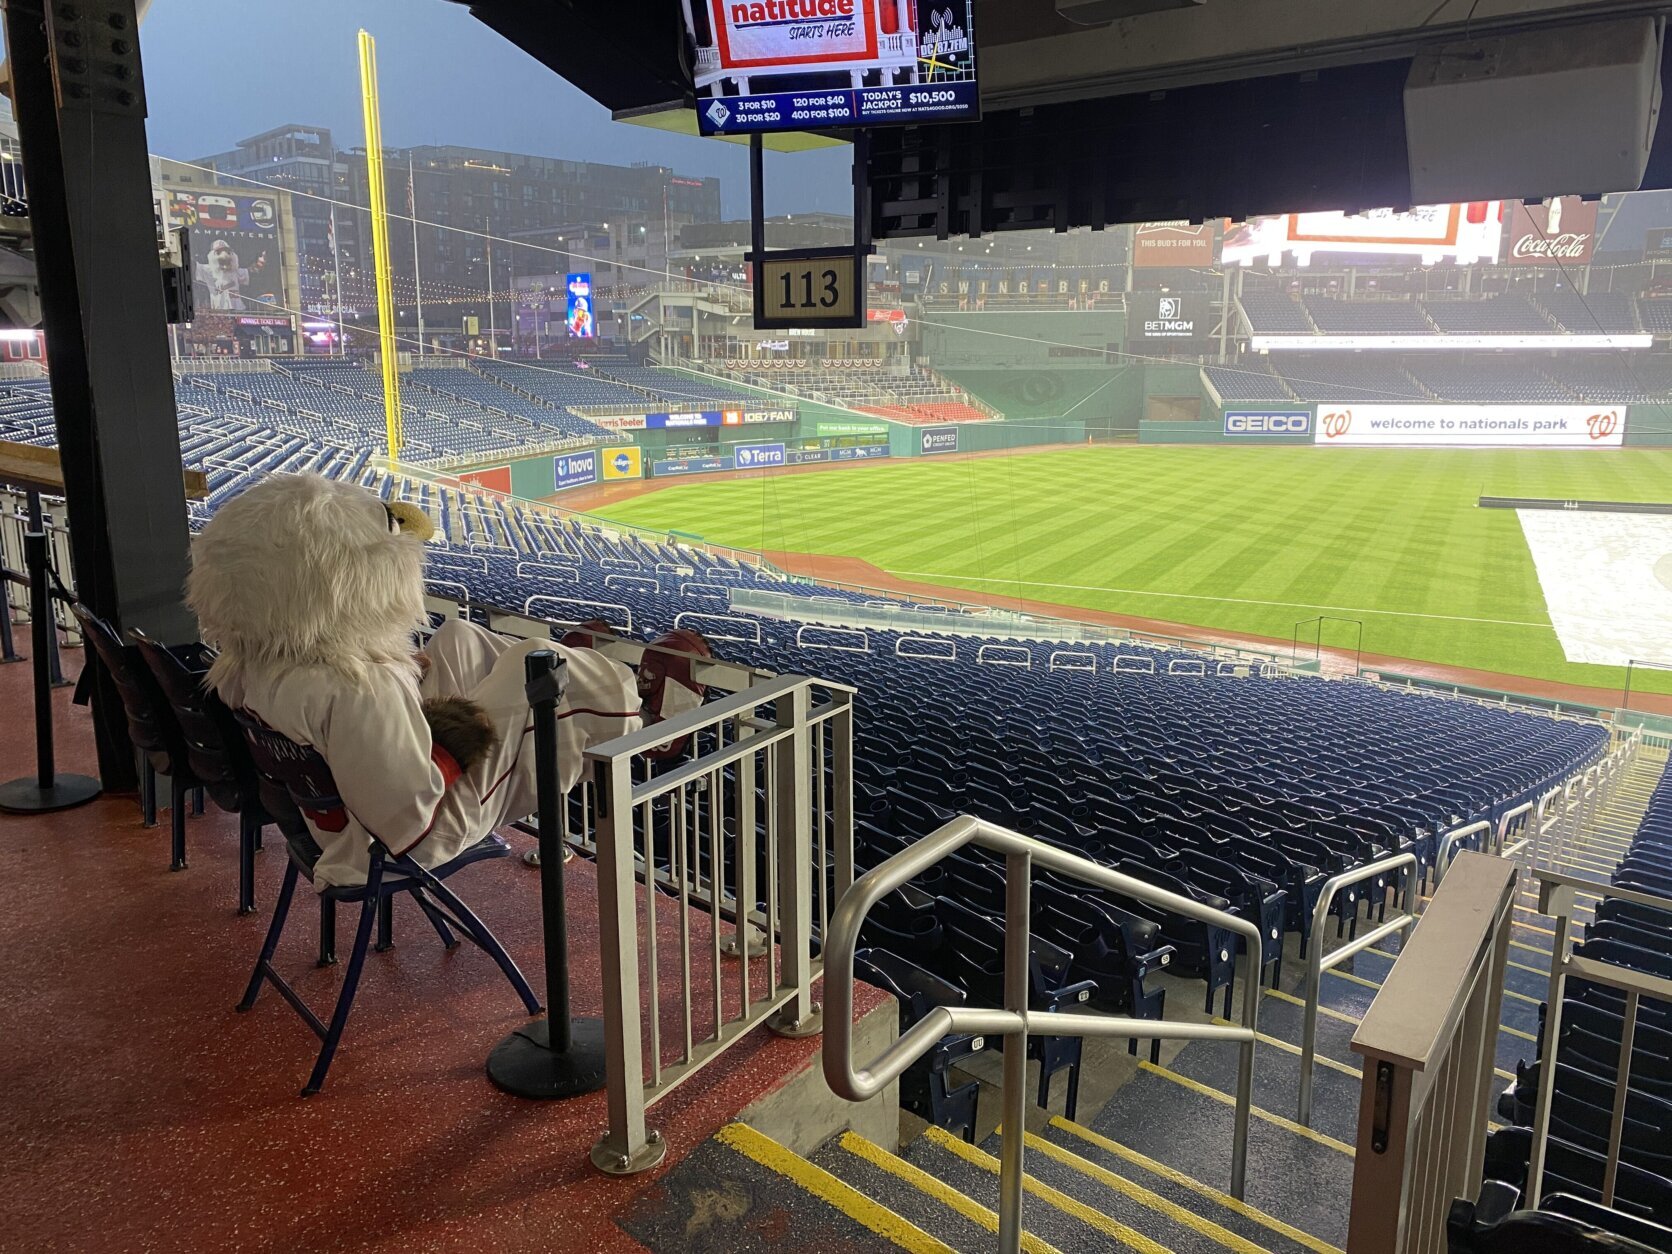 Screech the eagle watching the field at Nats Park